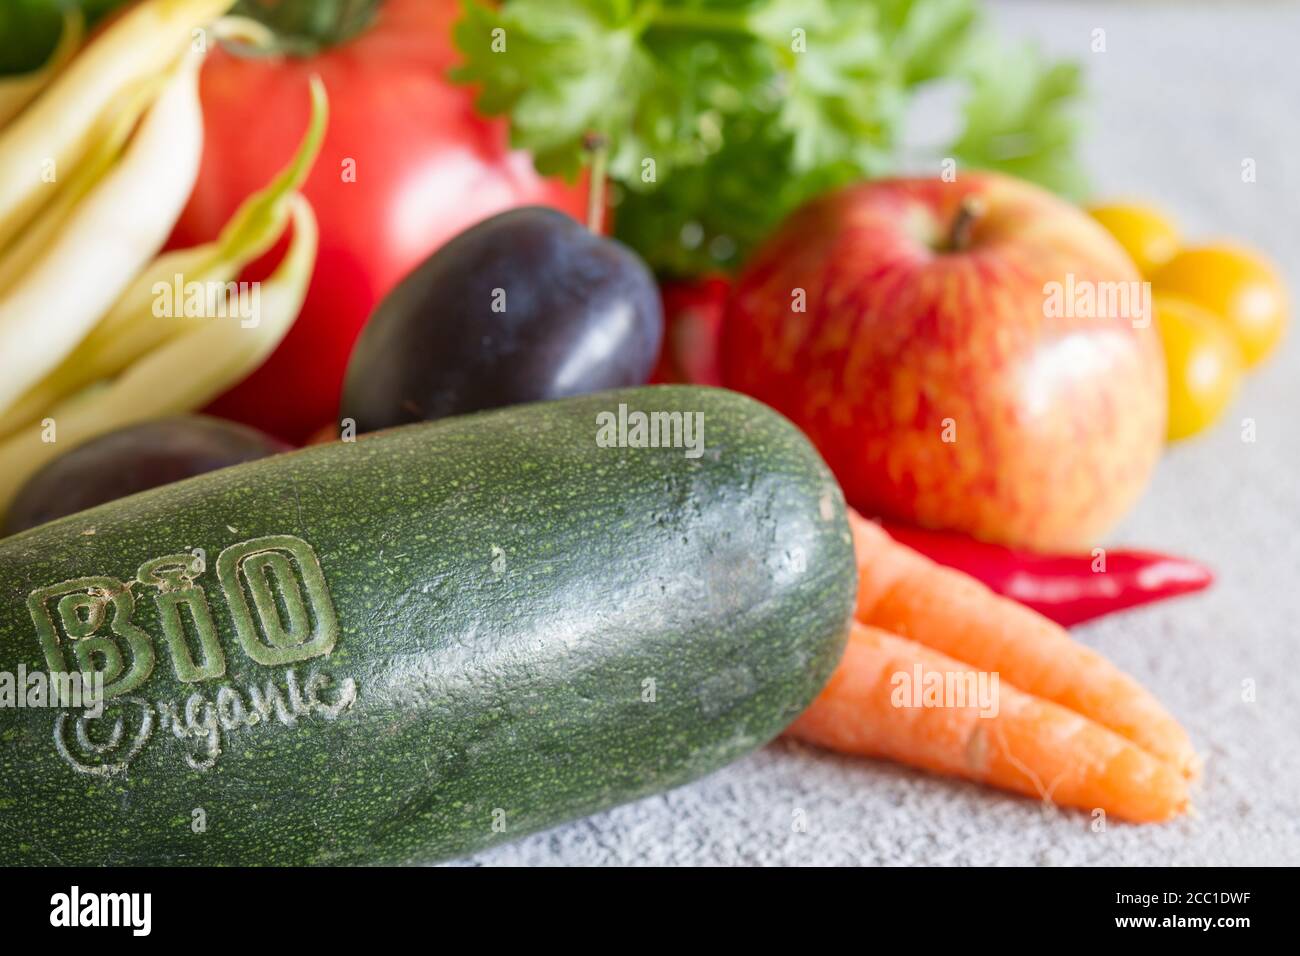 Bio organic vegetables and fruits, healthy food concept Stock Photo